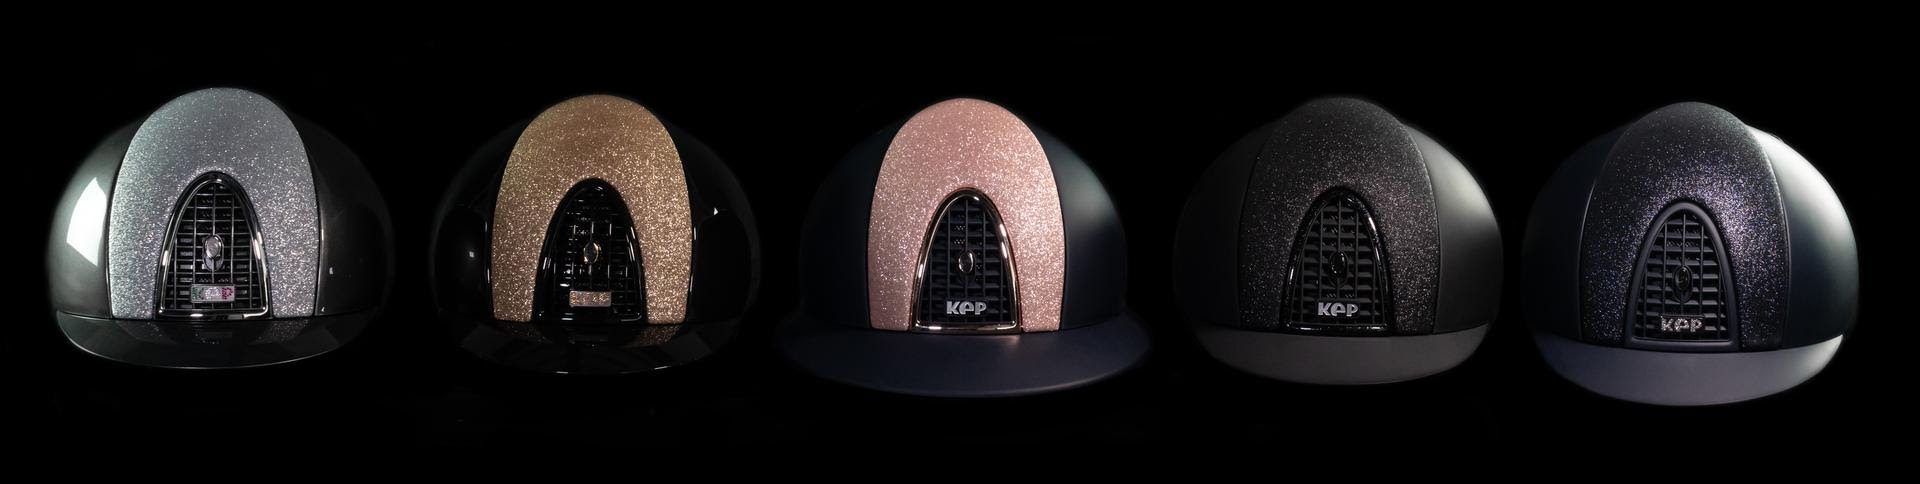 Did you know you can create your own KEP helmet?